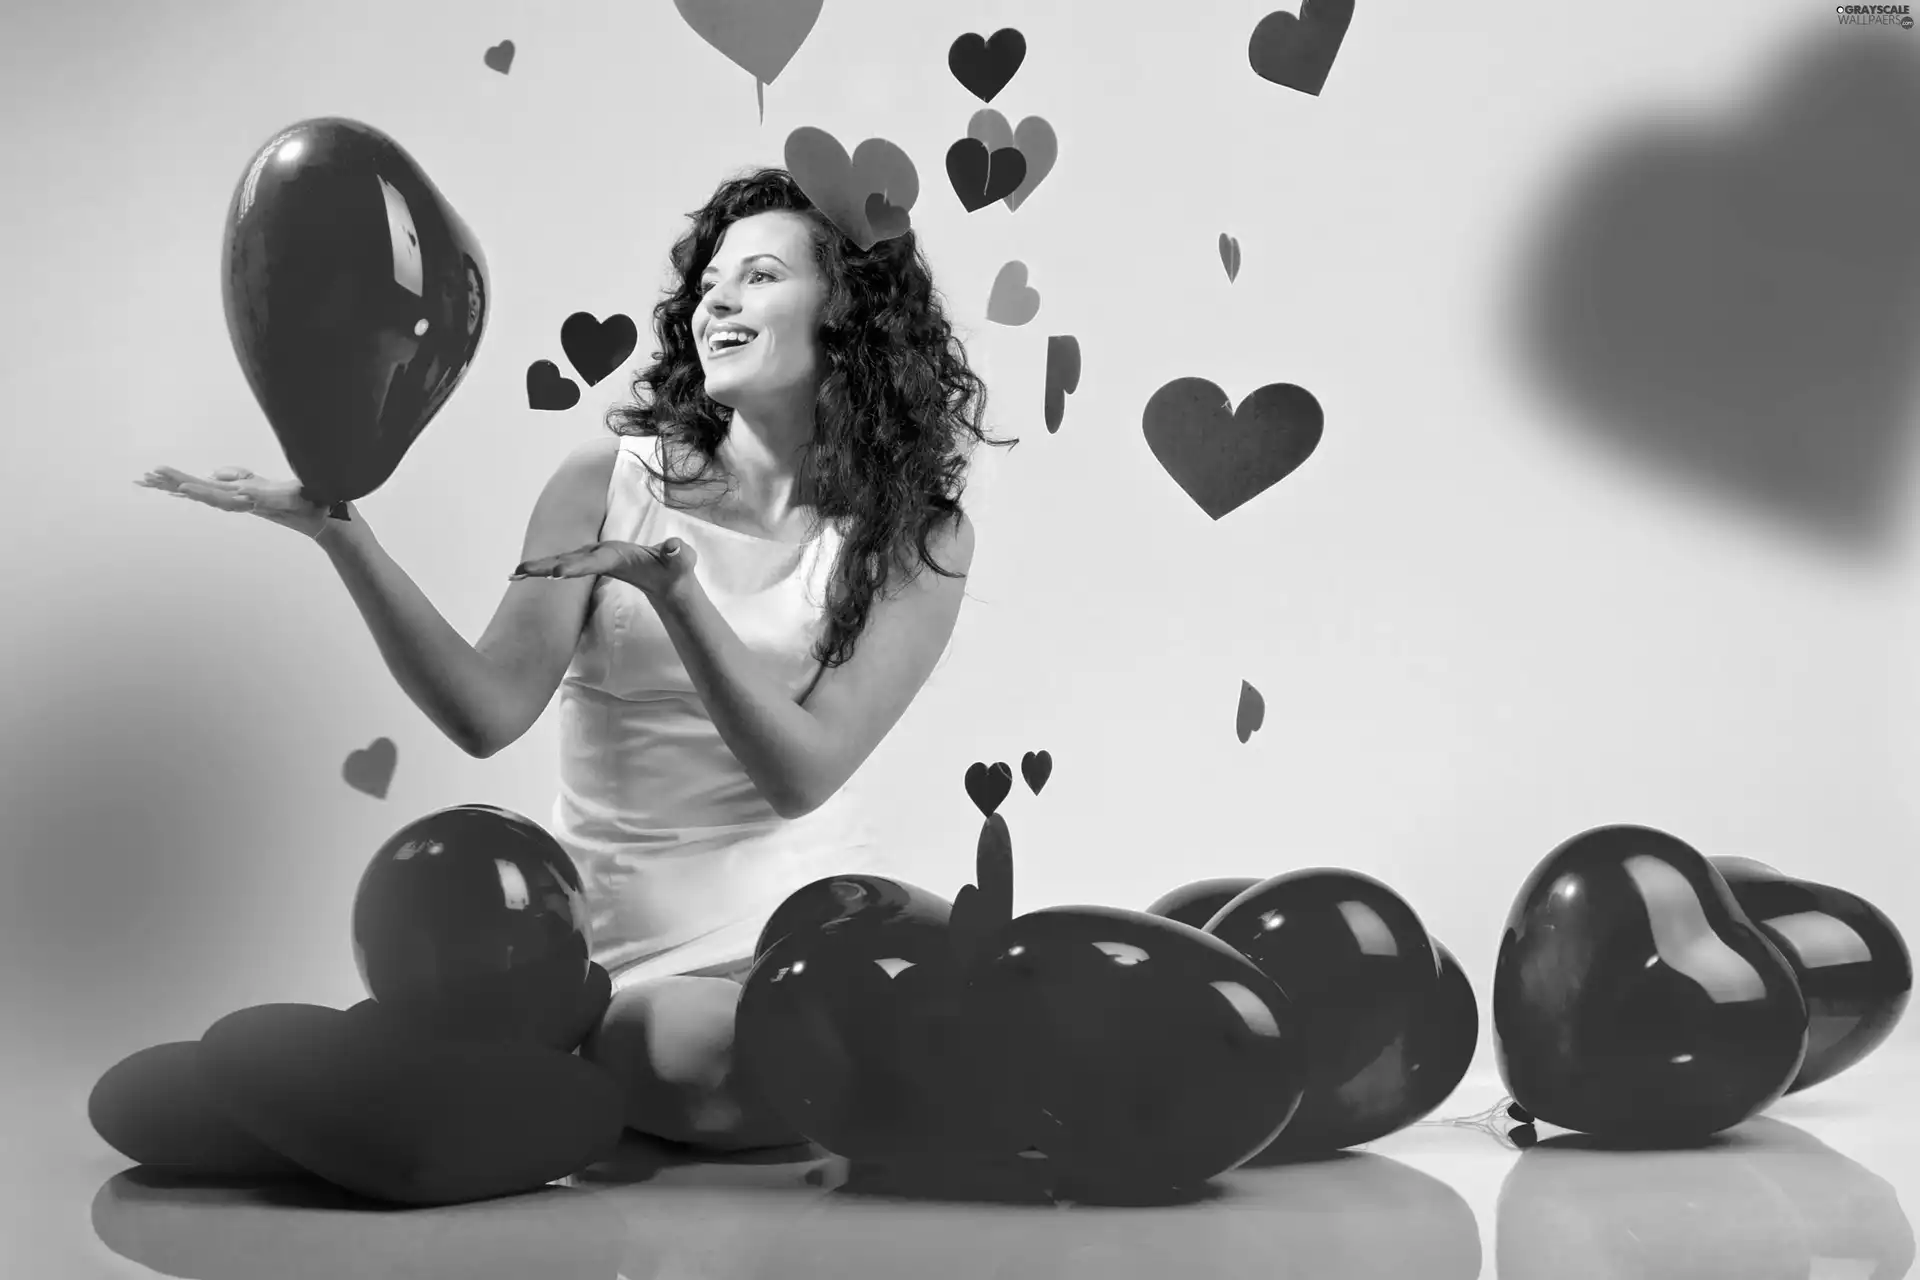 hearts, balloons, smiling, Valentine